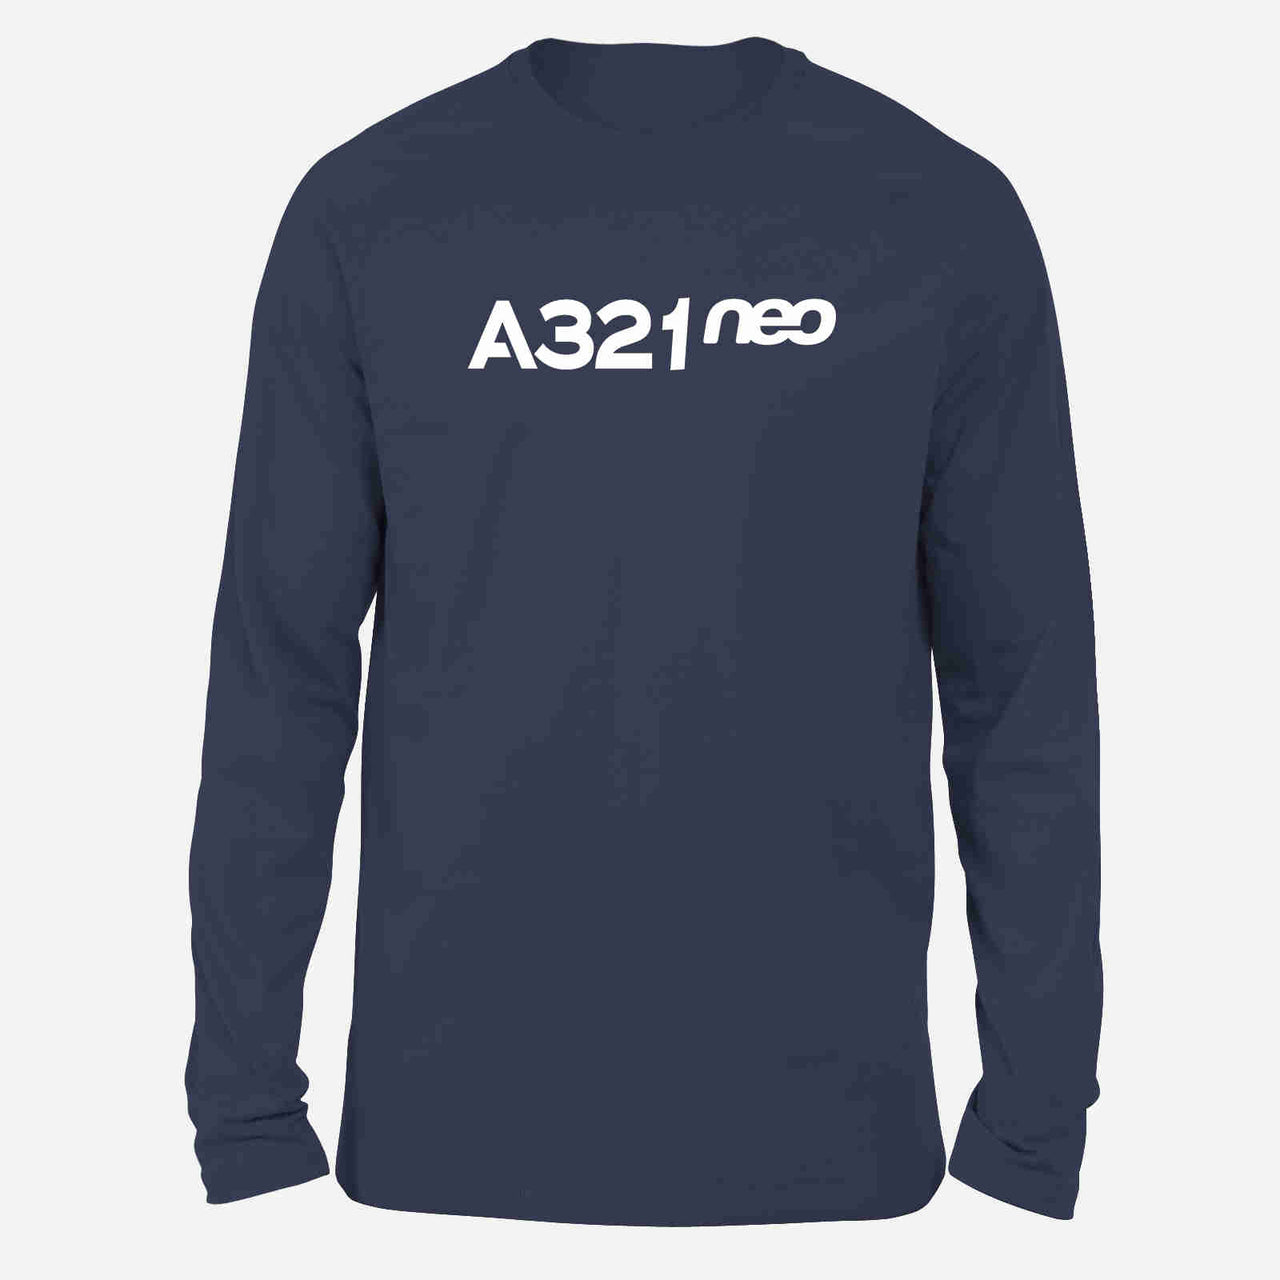 A321neo & Text Designed Long-Sleeve T-Shirts